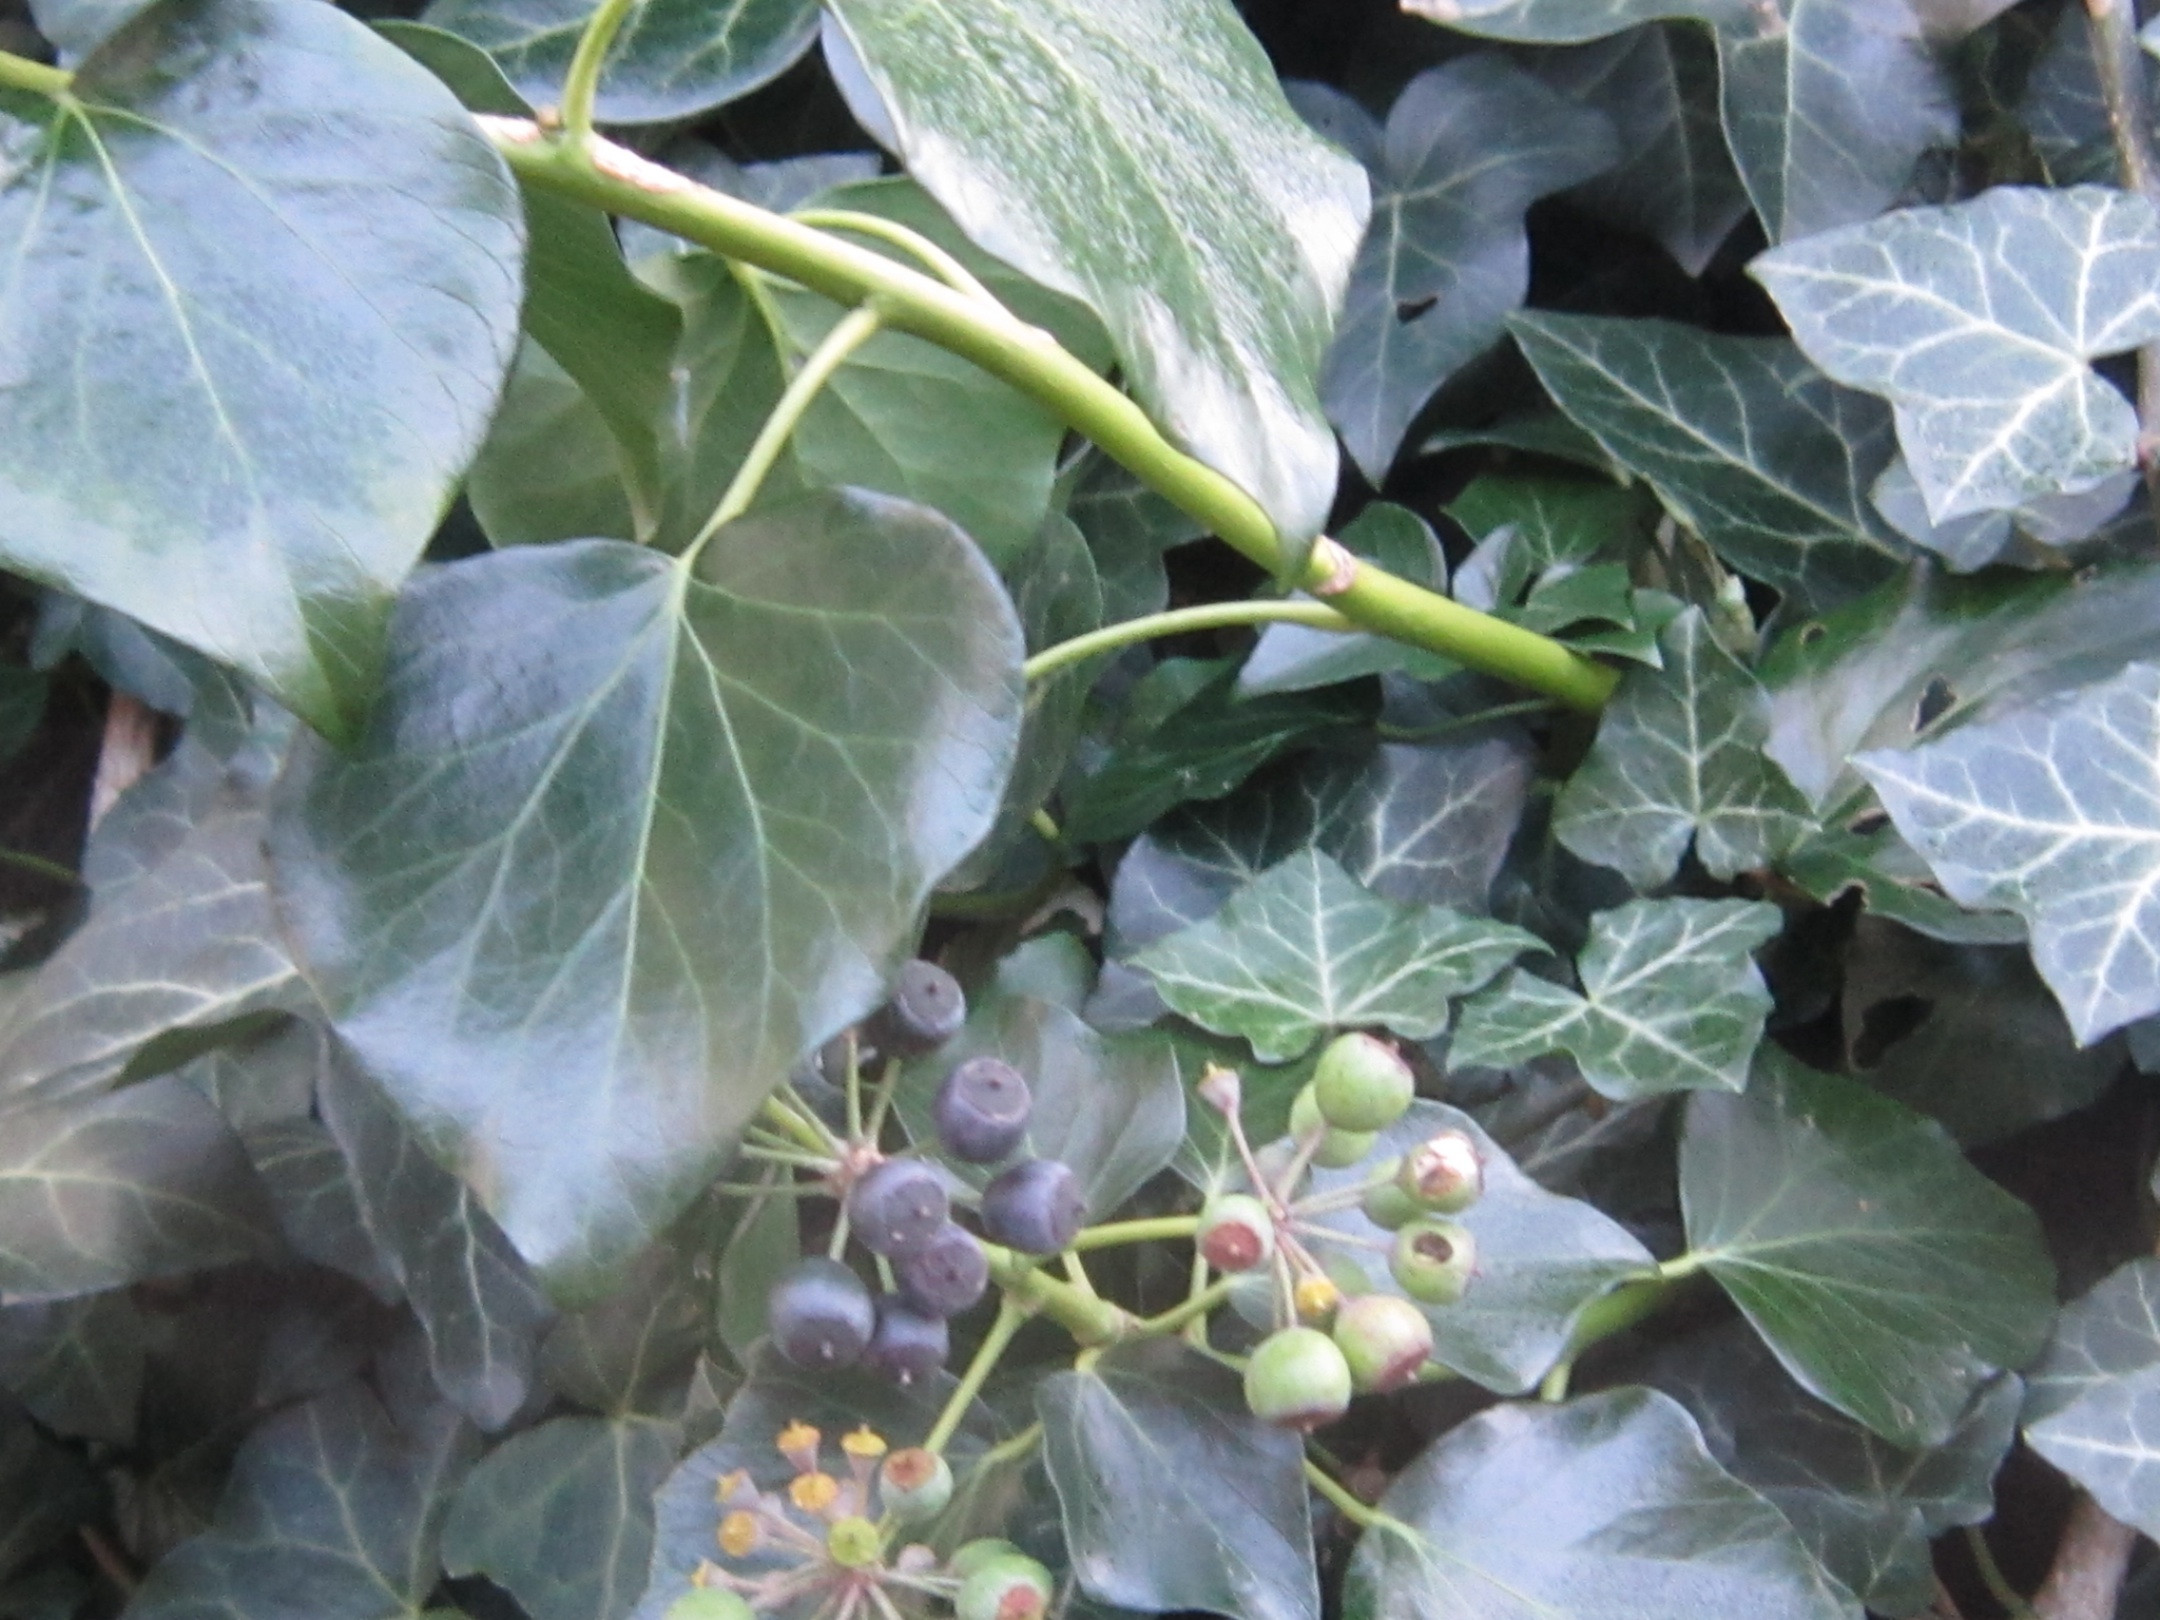 safety - Are these ivy berries poisonous to my guinea pig? - Pets ...